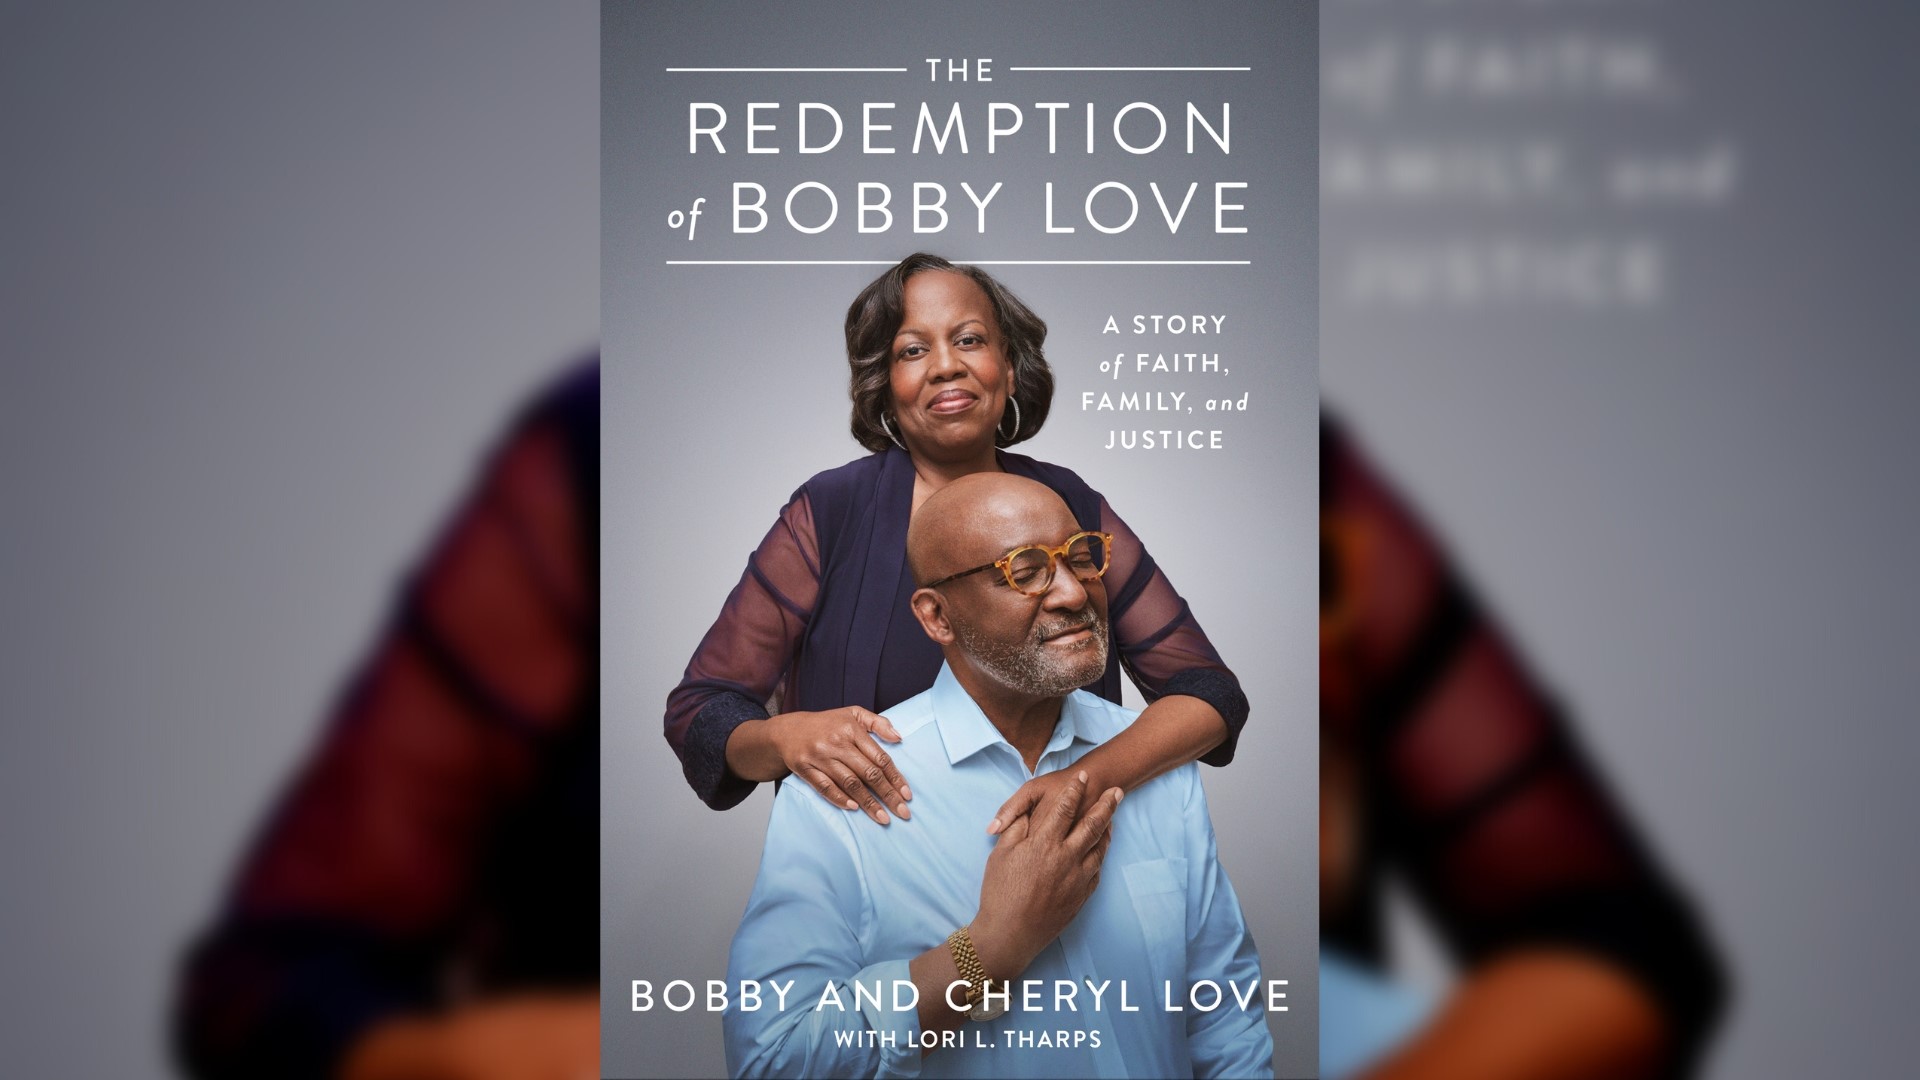 Cheryl and Bobby Love joined New Day NW to share their story, detailed in their book, "The Redemption of Bobby Love." #newdaynw